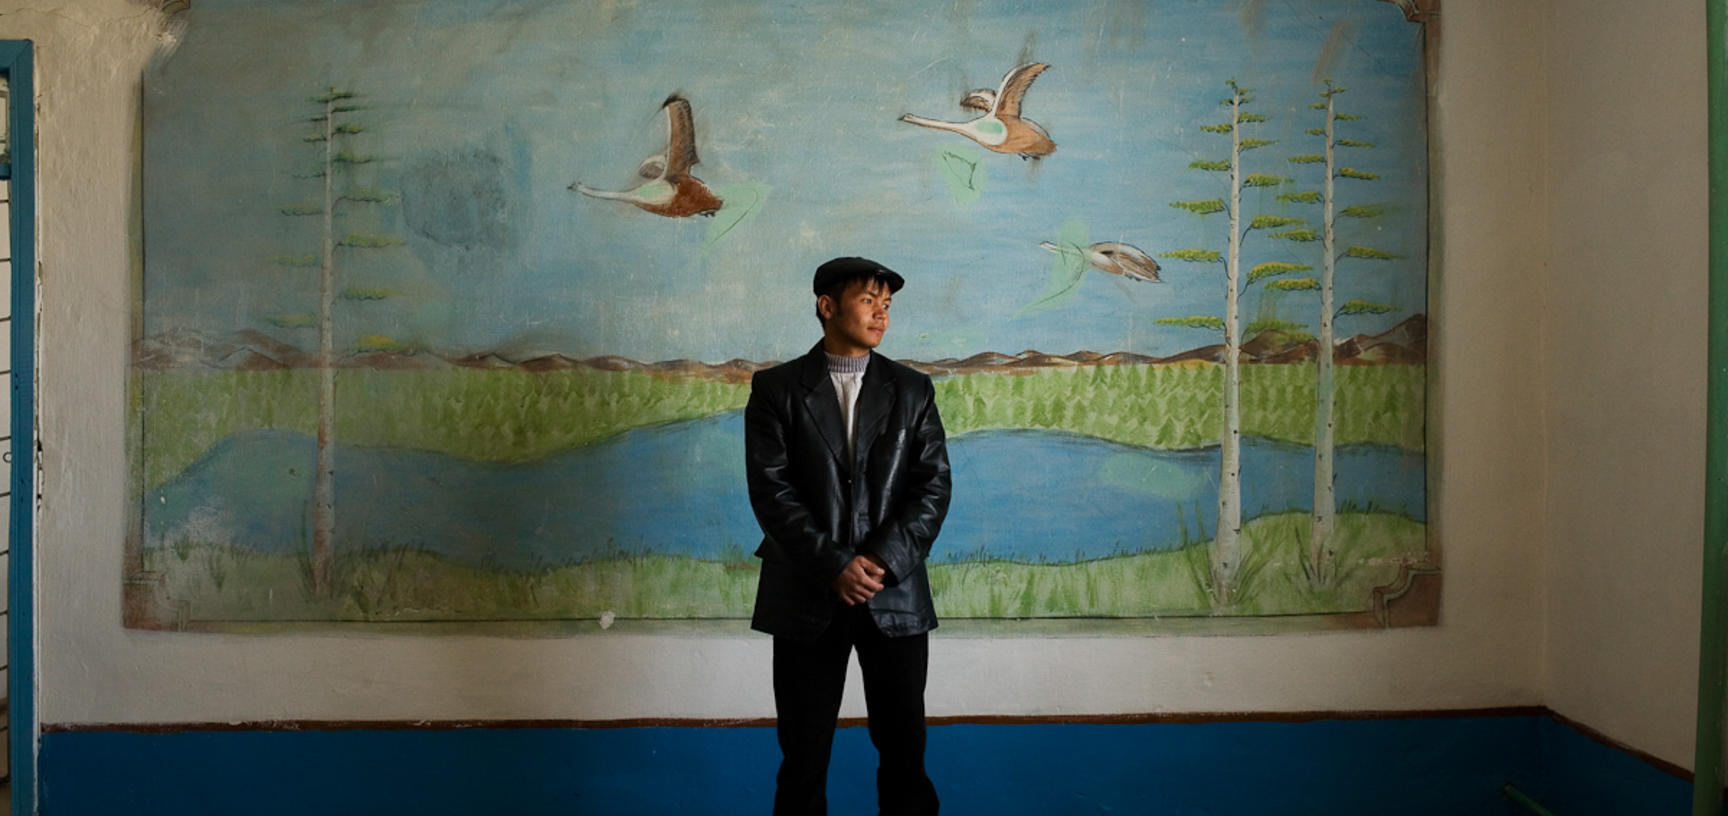 A student posing for a portrait in front of a mural inside his school in Muynaq. This city has been devastated by the shrinking of the Aral Sea. Muynaq, Uzbekistan. Photograph by Carolyn Drake. March 2008.